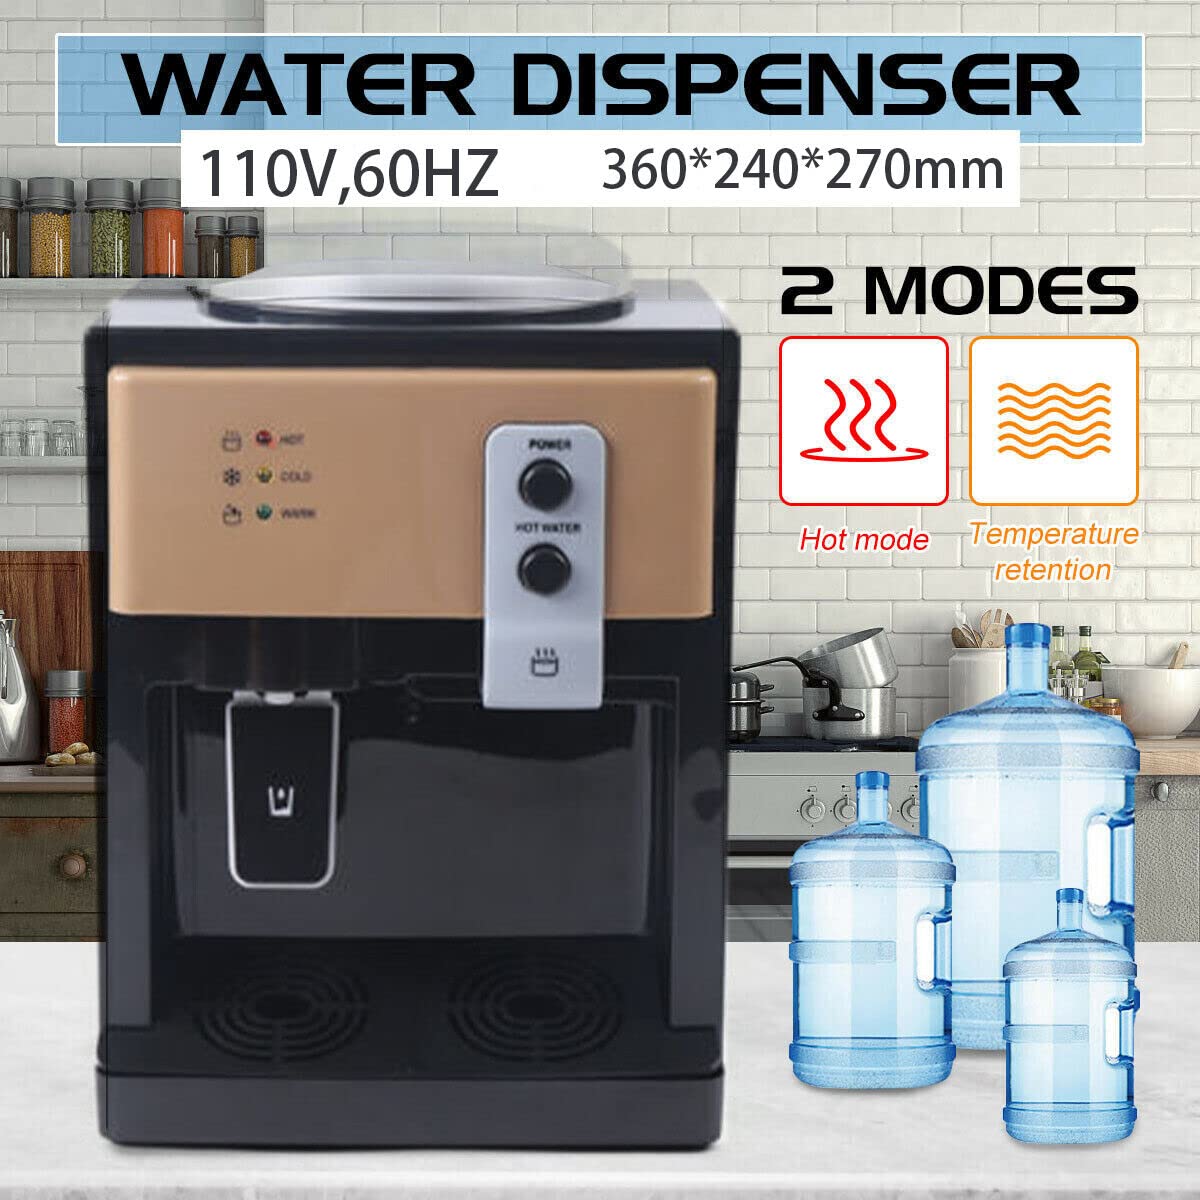 Countertop Water Dispenser Top Loading Hot Cold Water Cooler Drinking Machine for Home Office